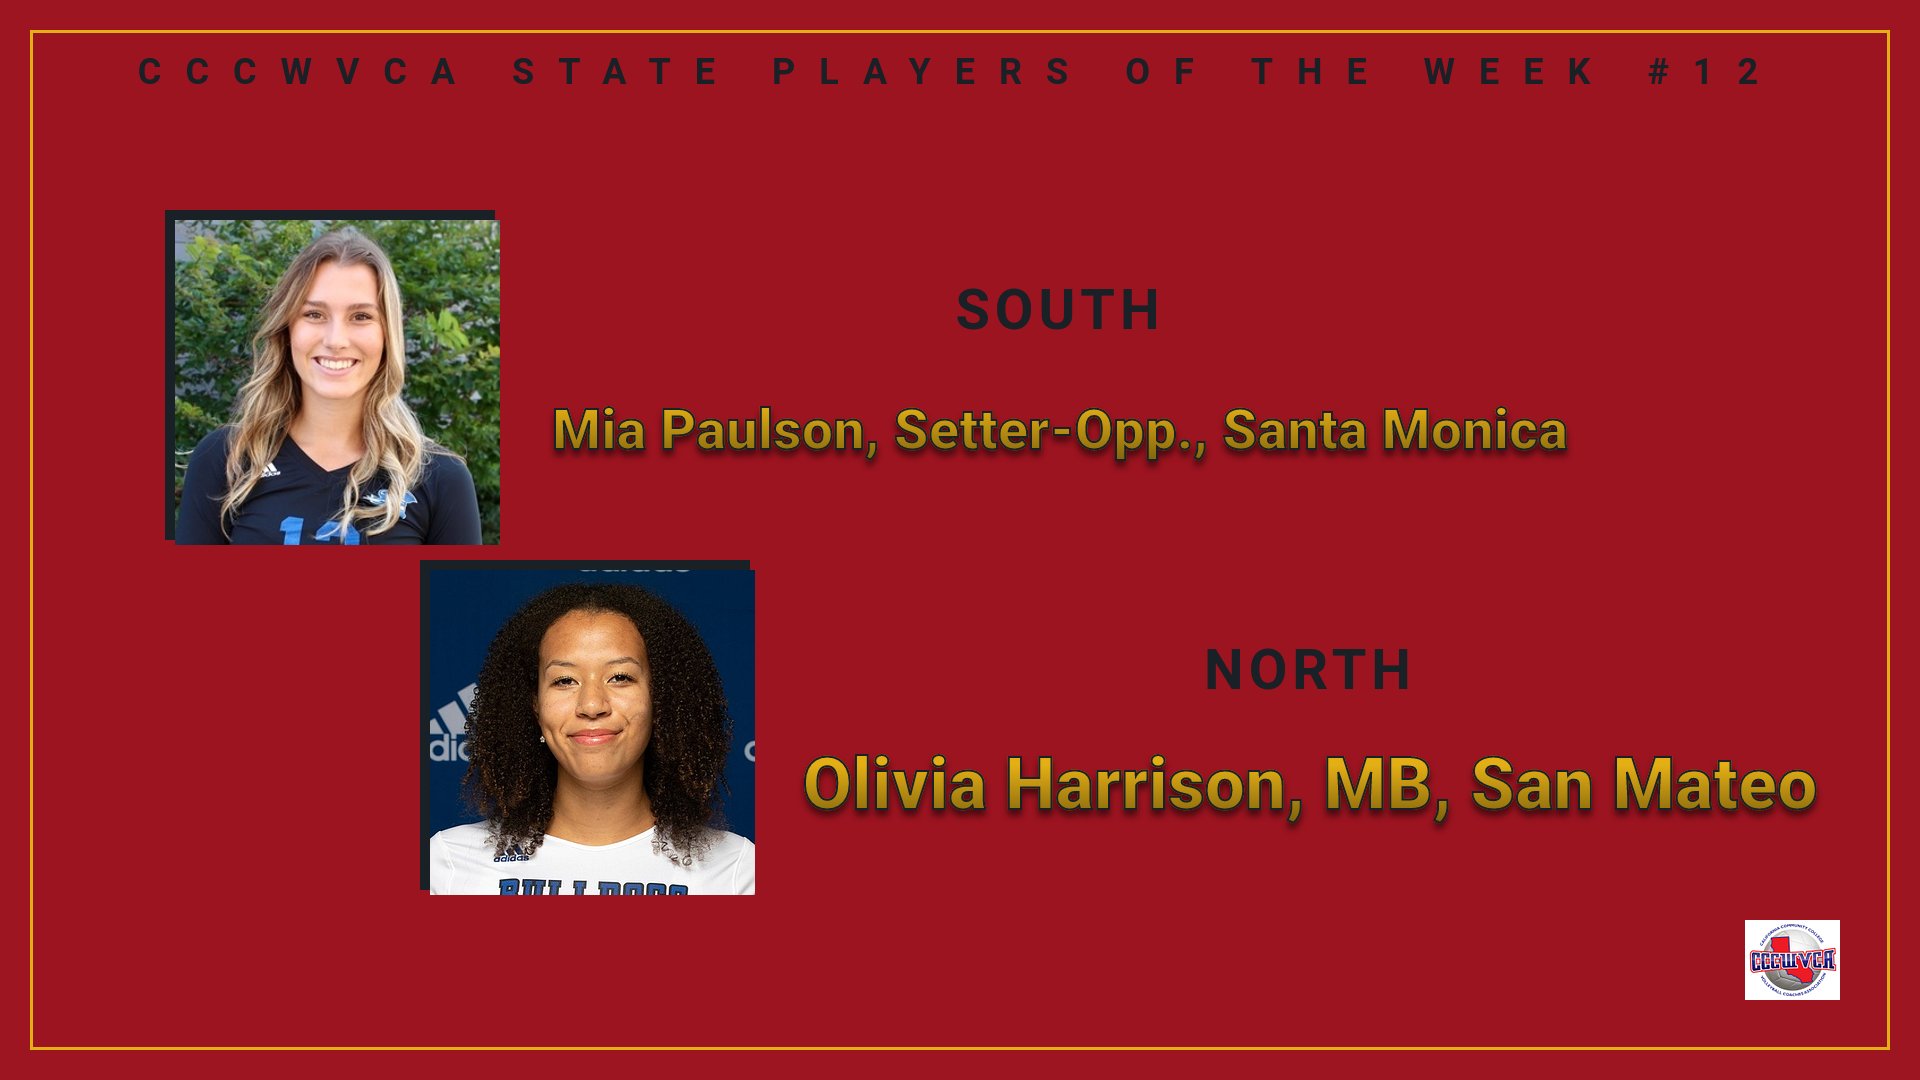 Bulldogs' Olivia Harrison named CCCWVCA State Player of the Week